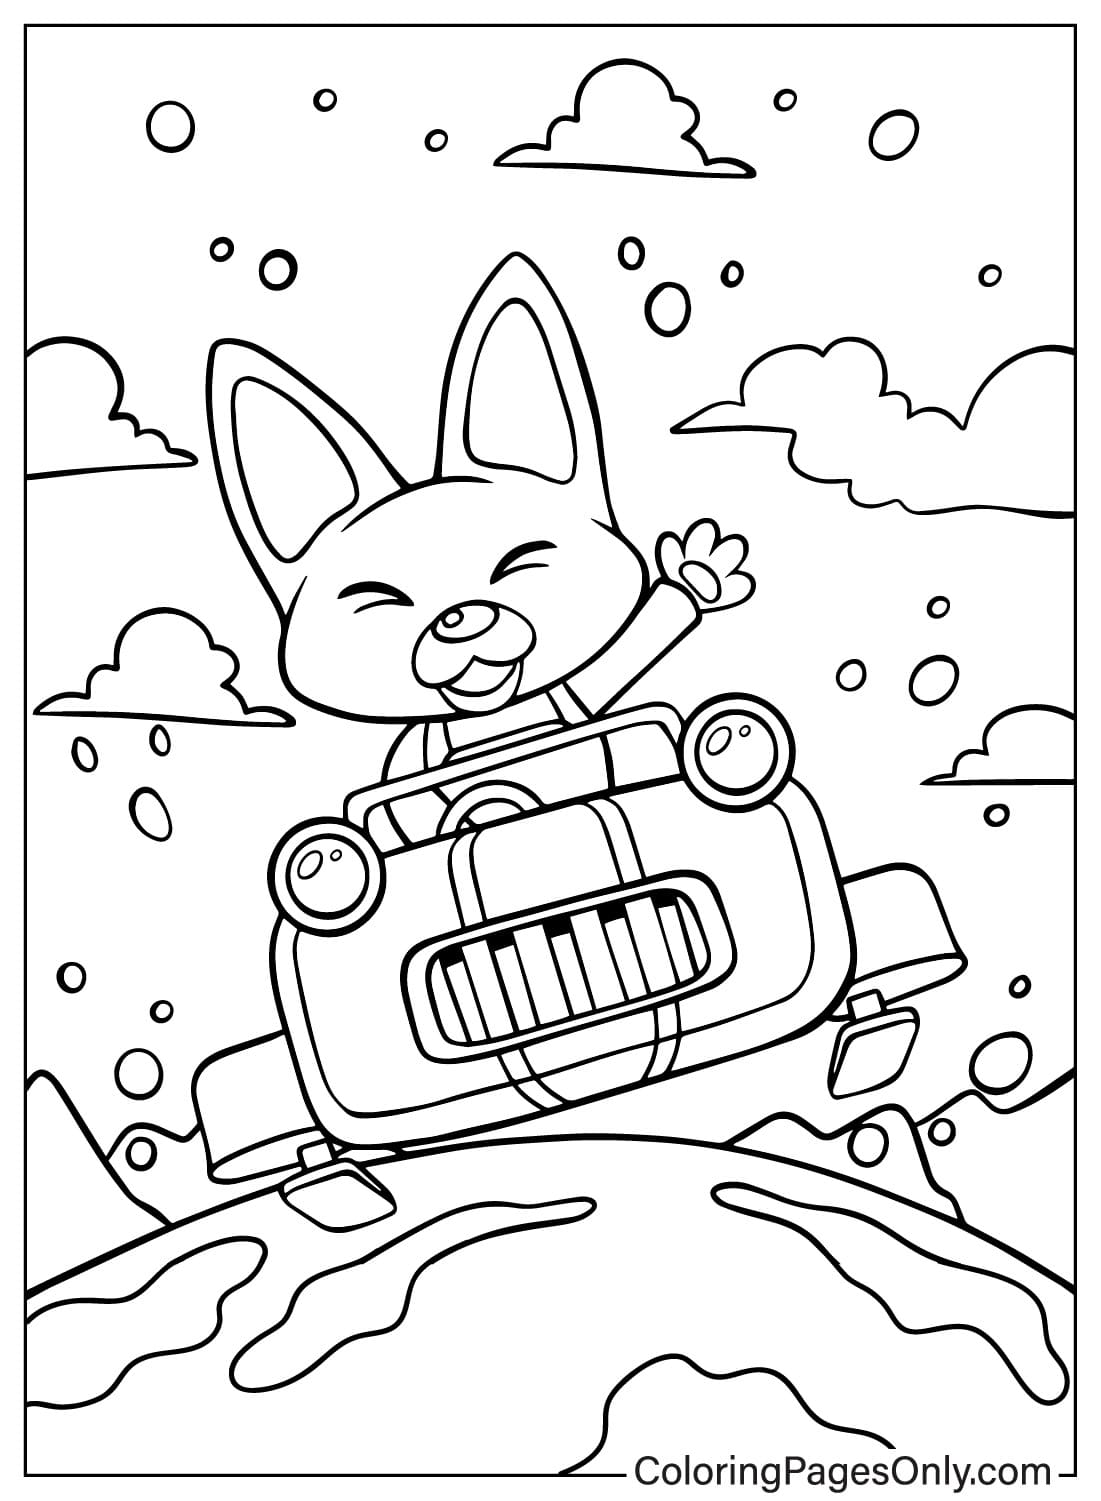 Eddy Coloring Page from Pororo the Little Penguin